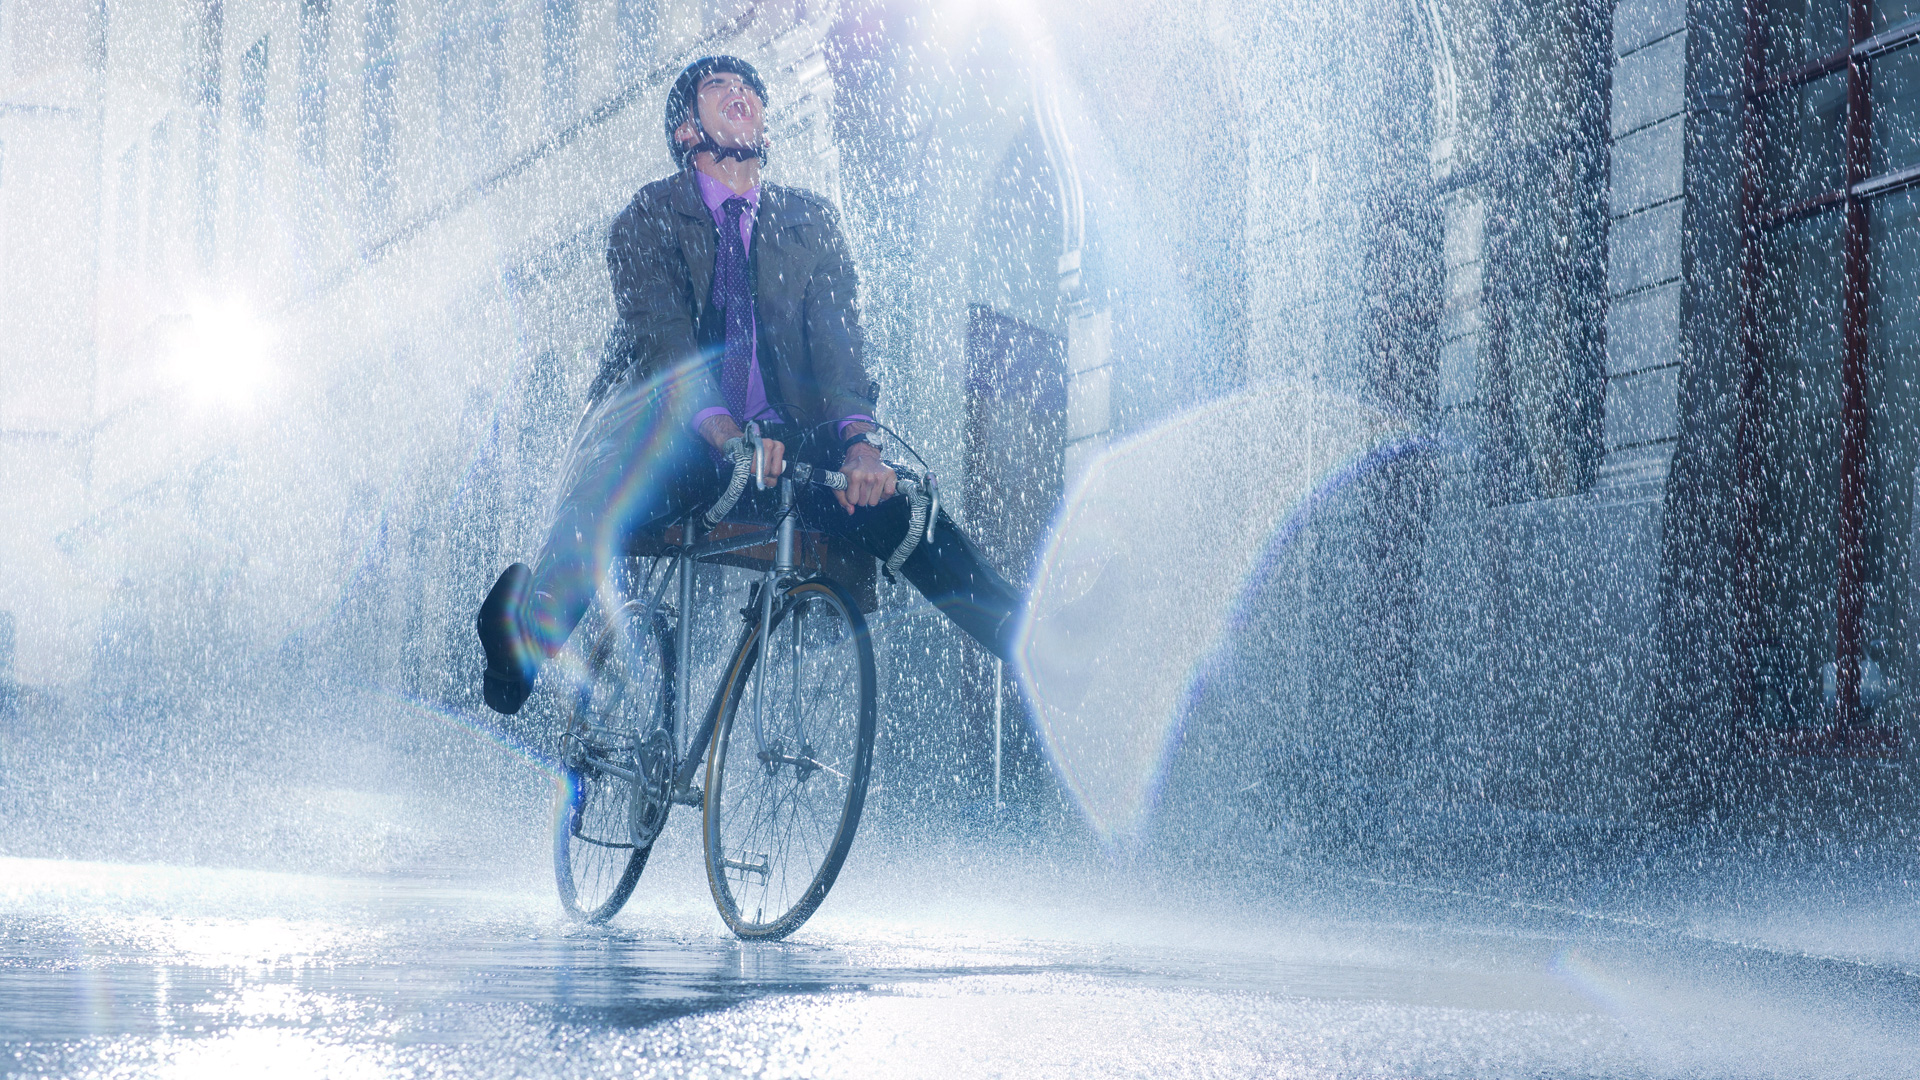 ♪ Just cycling in the rain ♫